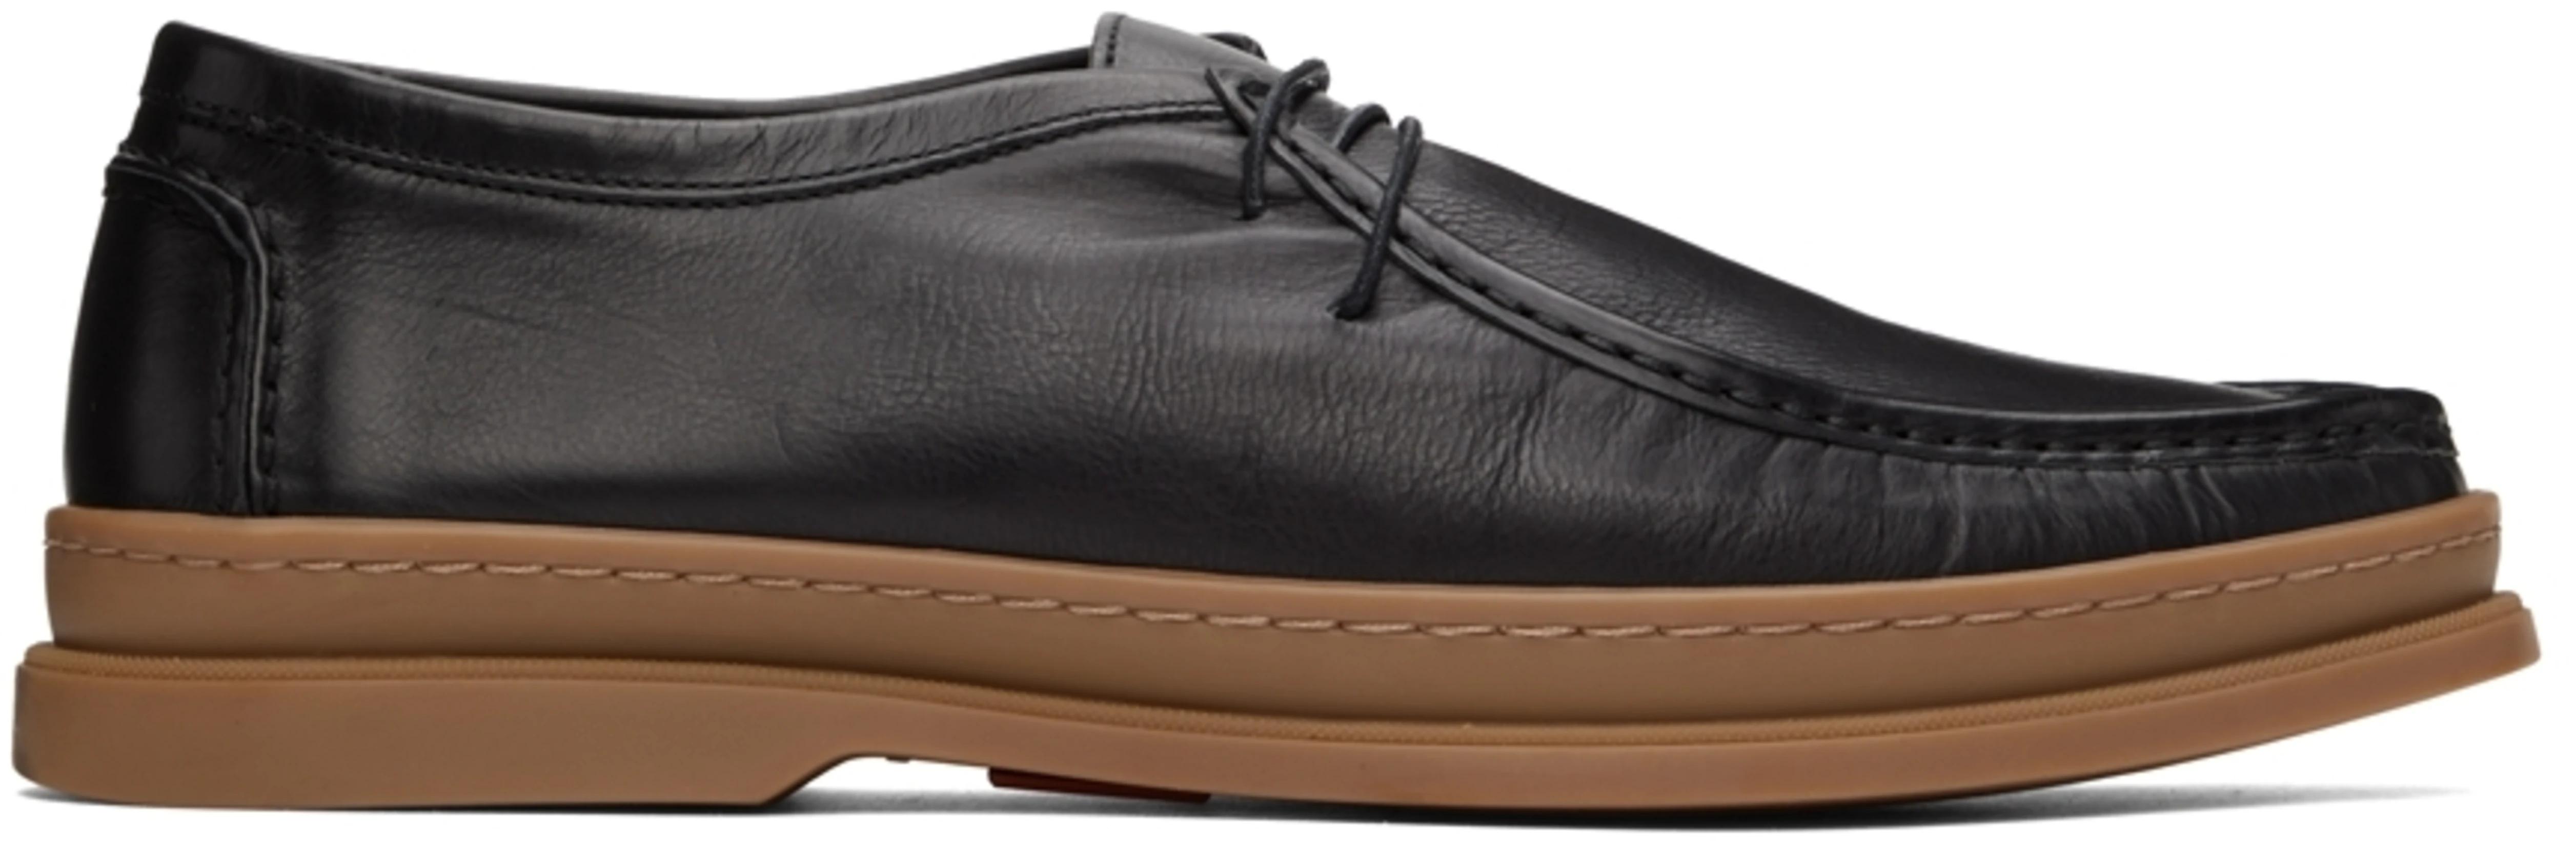 Black Cyrus Oxfords by PAUL SMITH